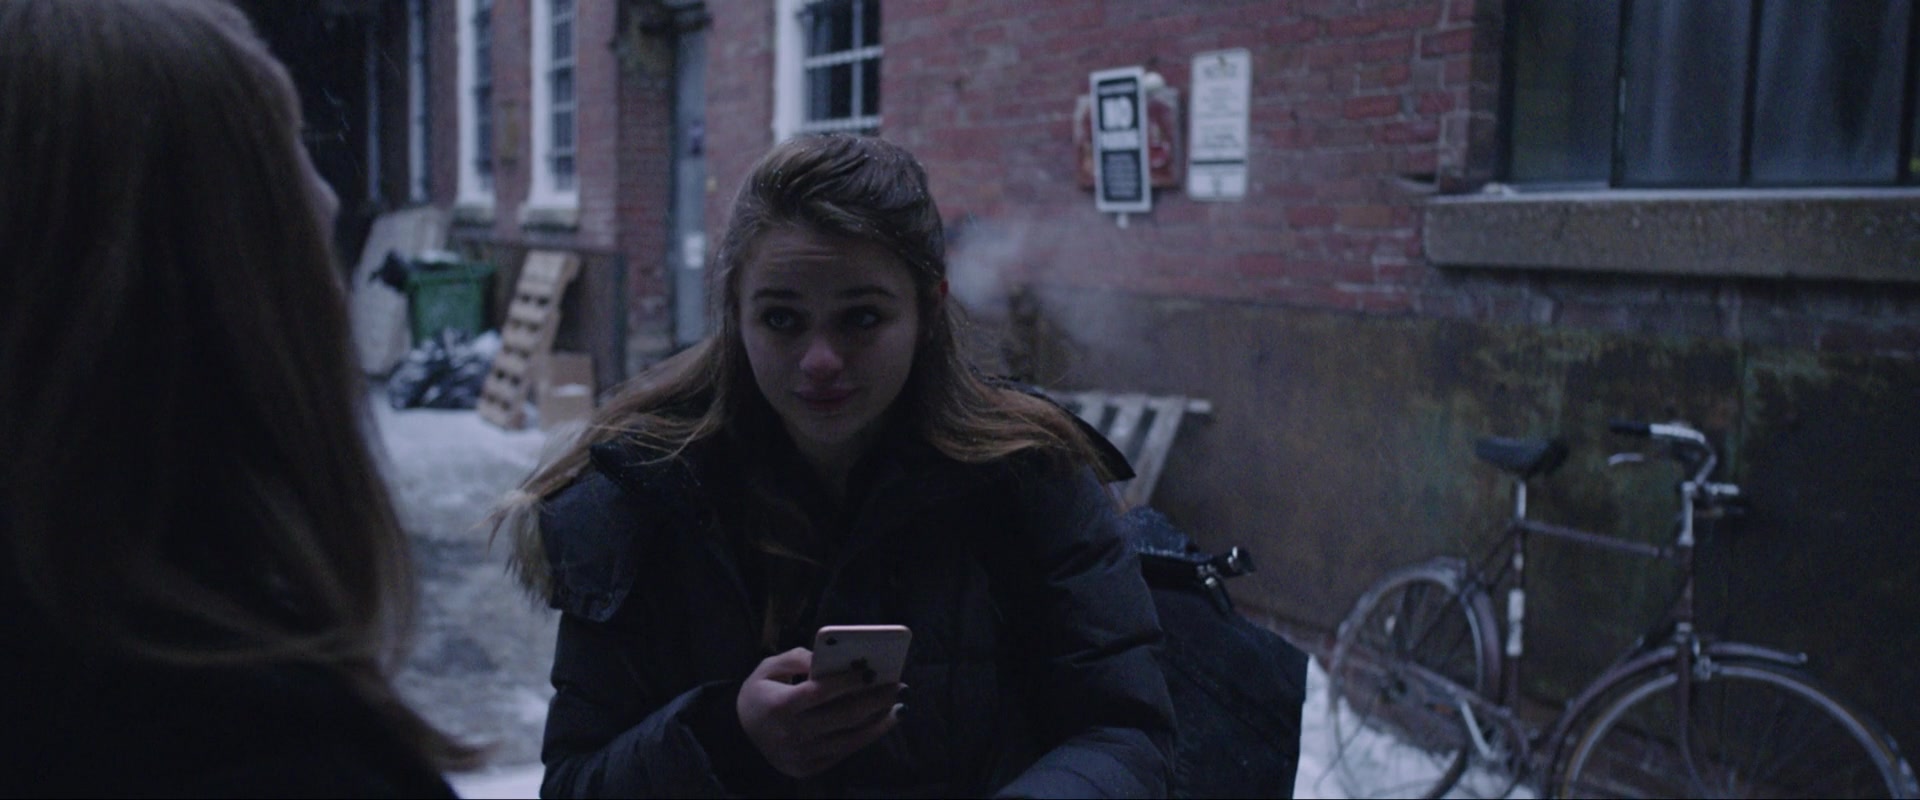 Apple IPhone Smartphone Of Joey King As Kayla In The Lie (2018)